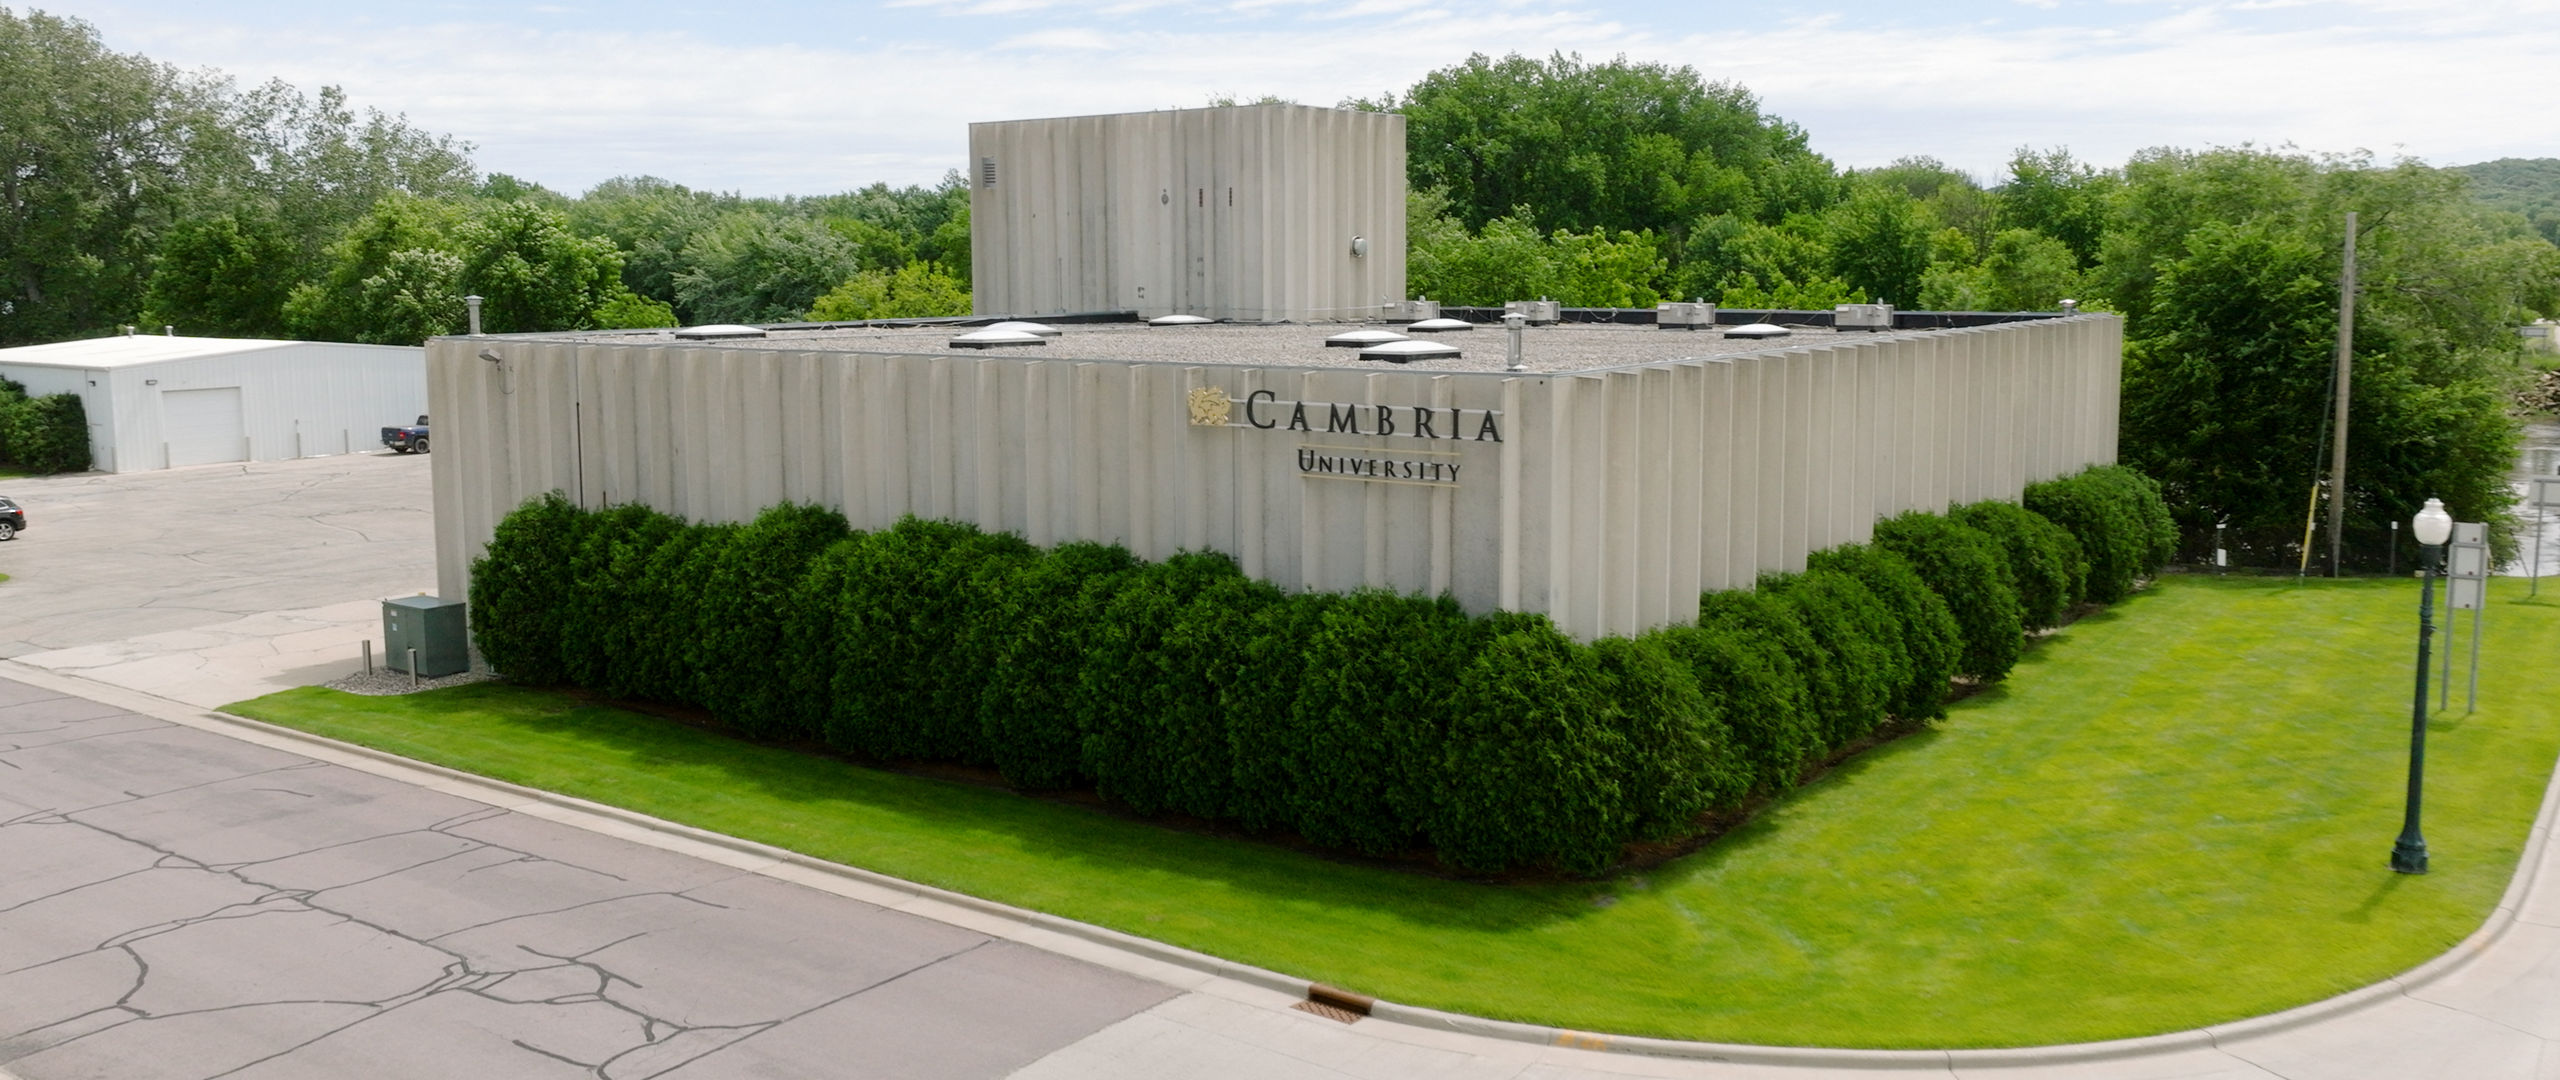 The front of Cambria University